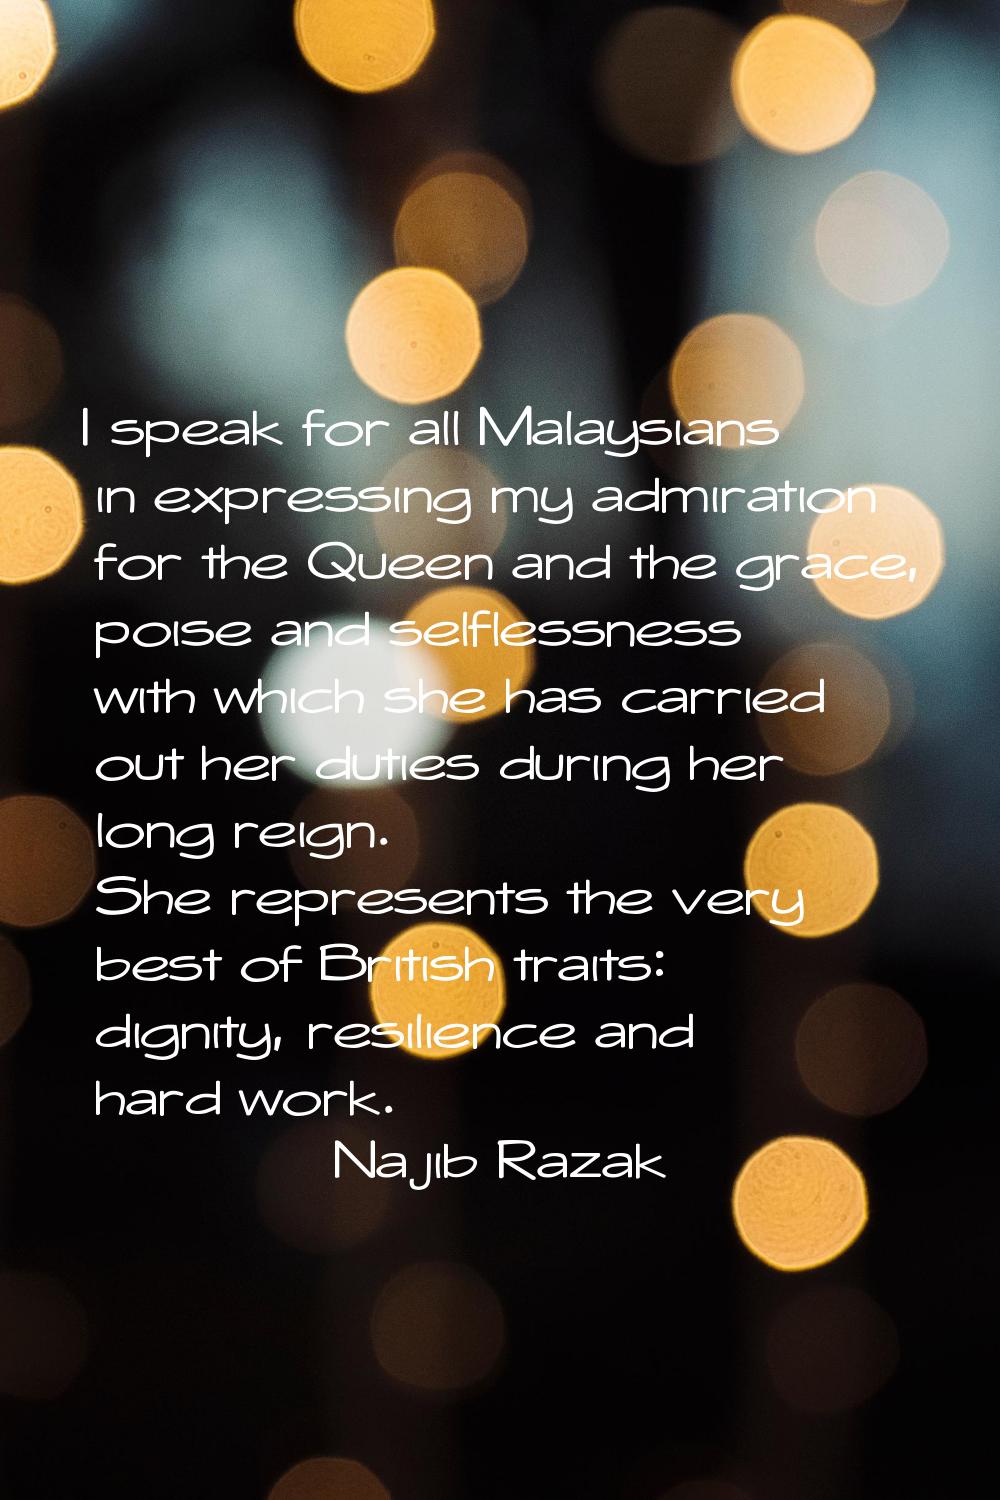 I speak for all Malaysians in expressing my admiration for the Queen and the grace, poise and selfl